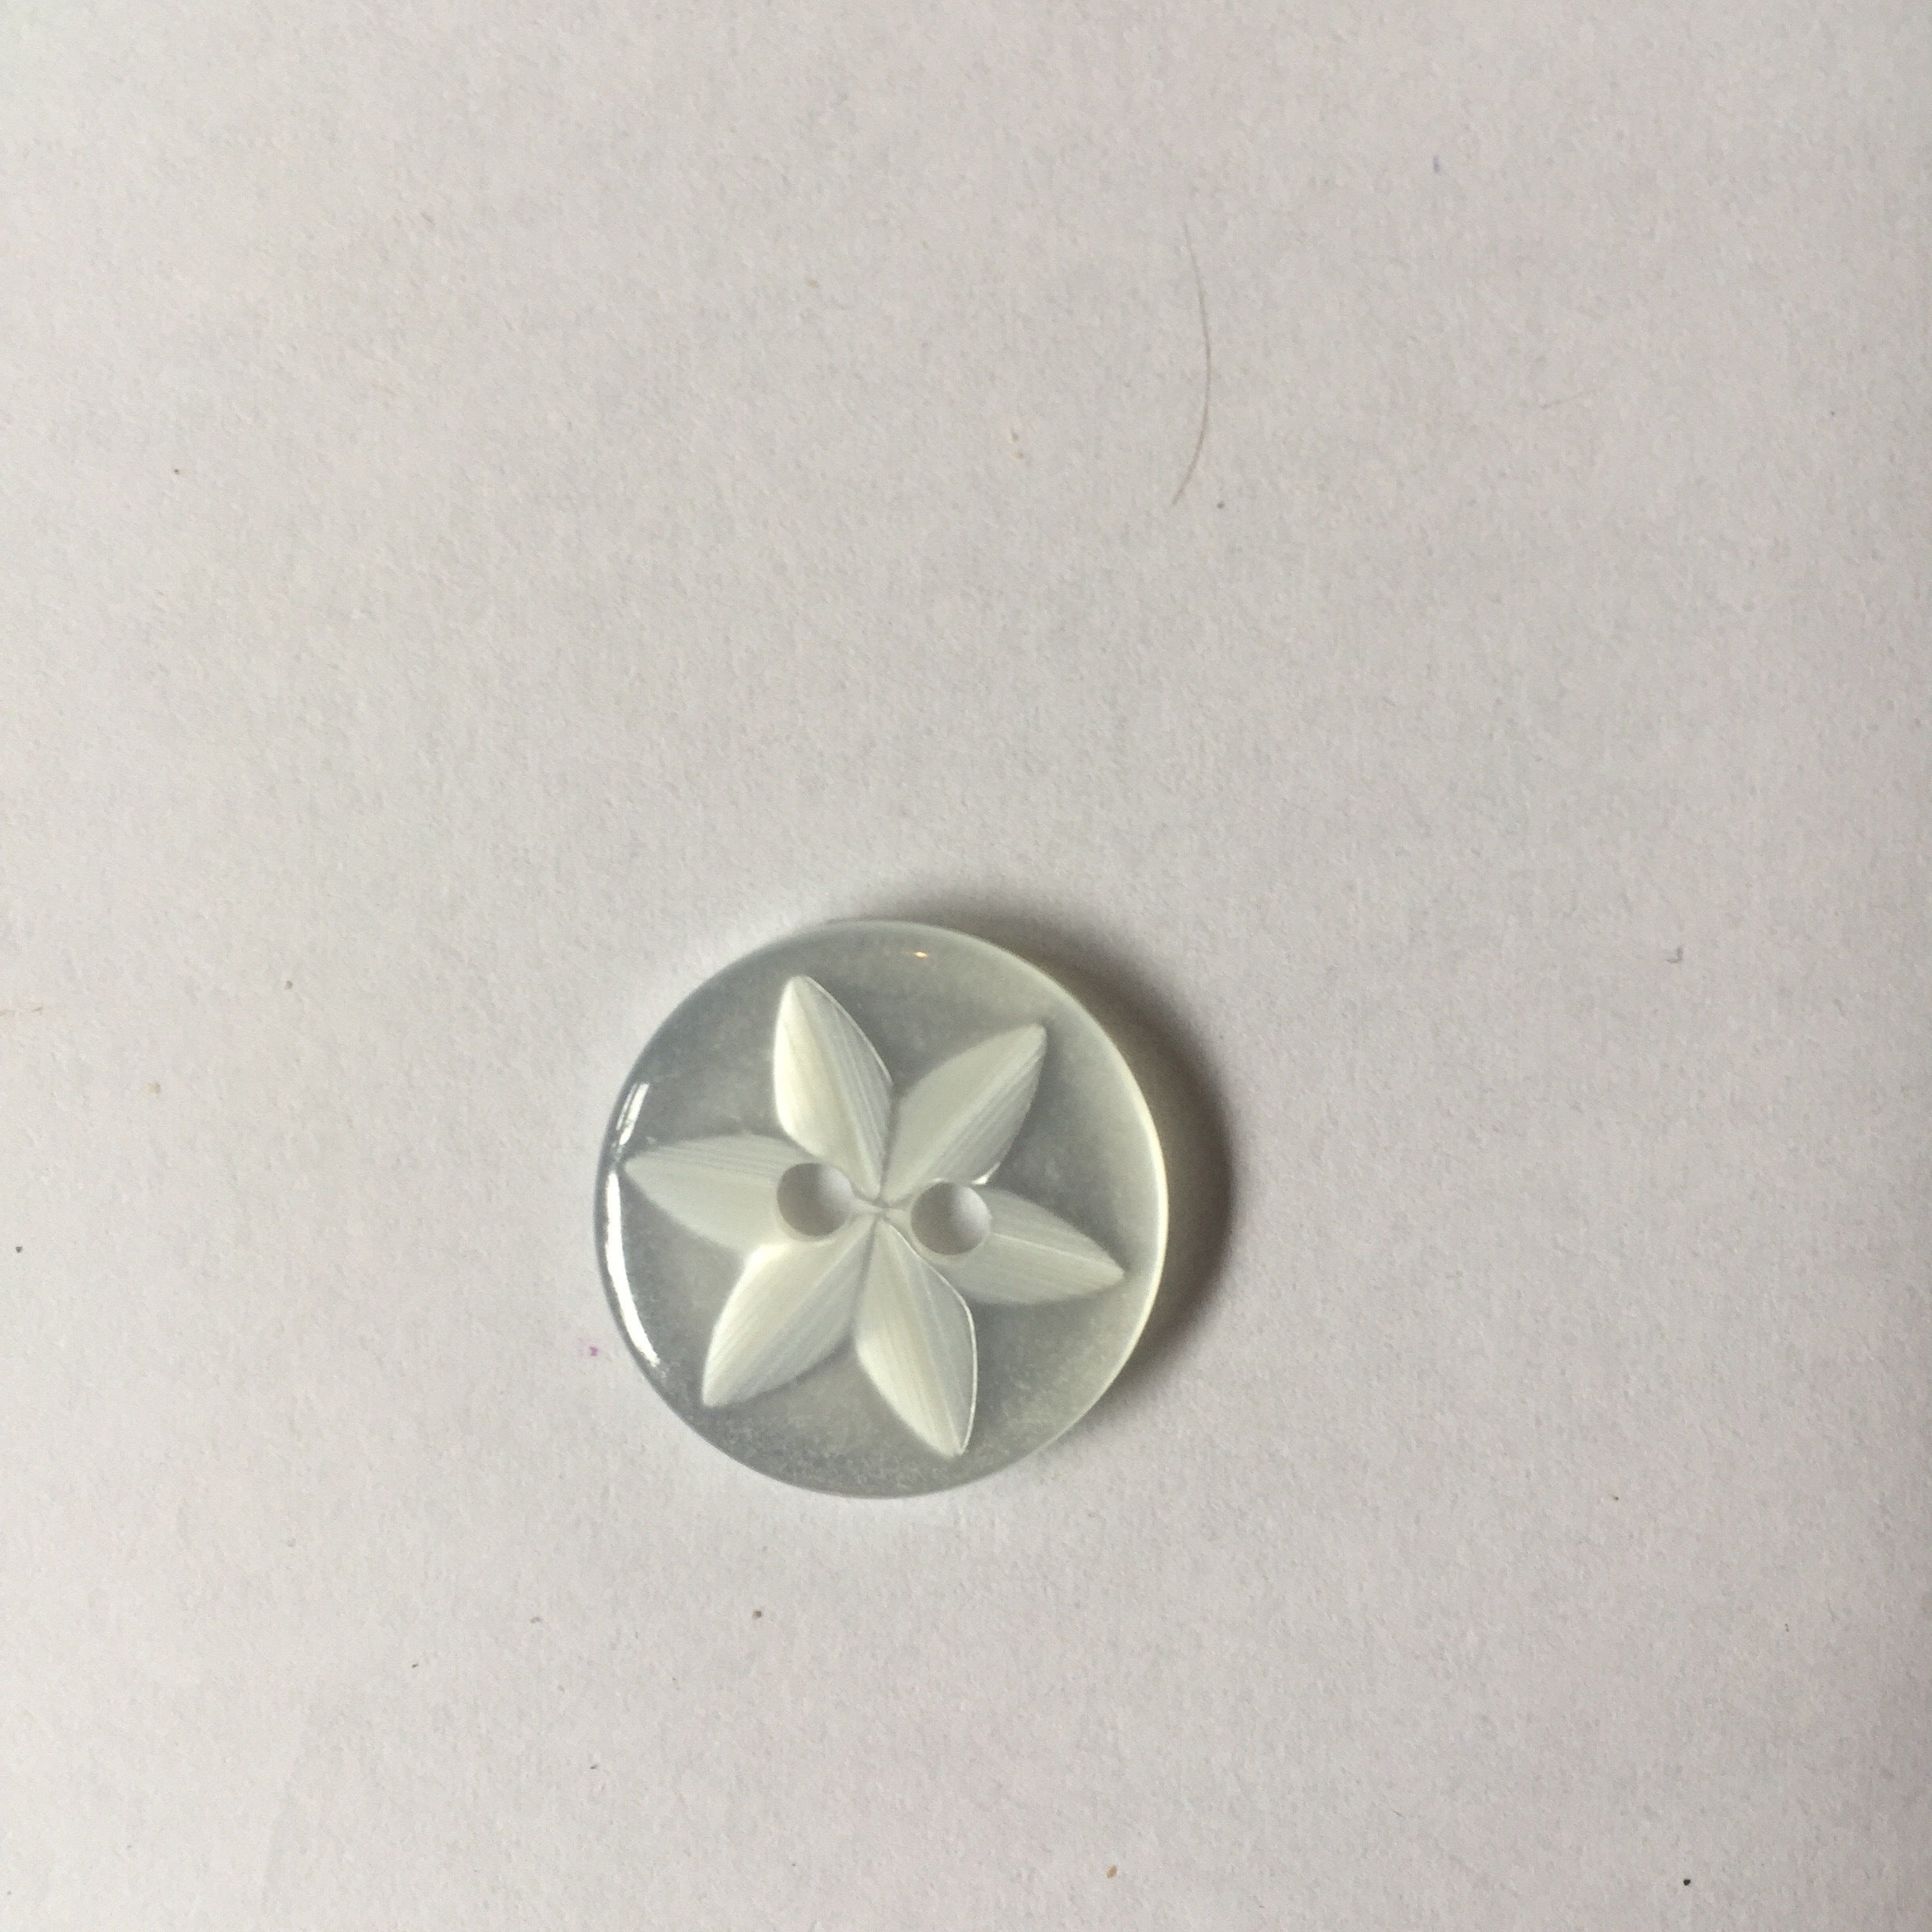 Large Star buttons - 16mm